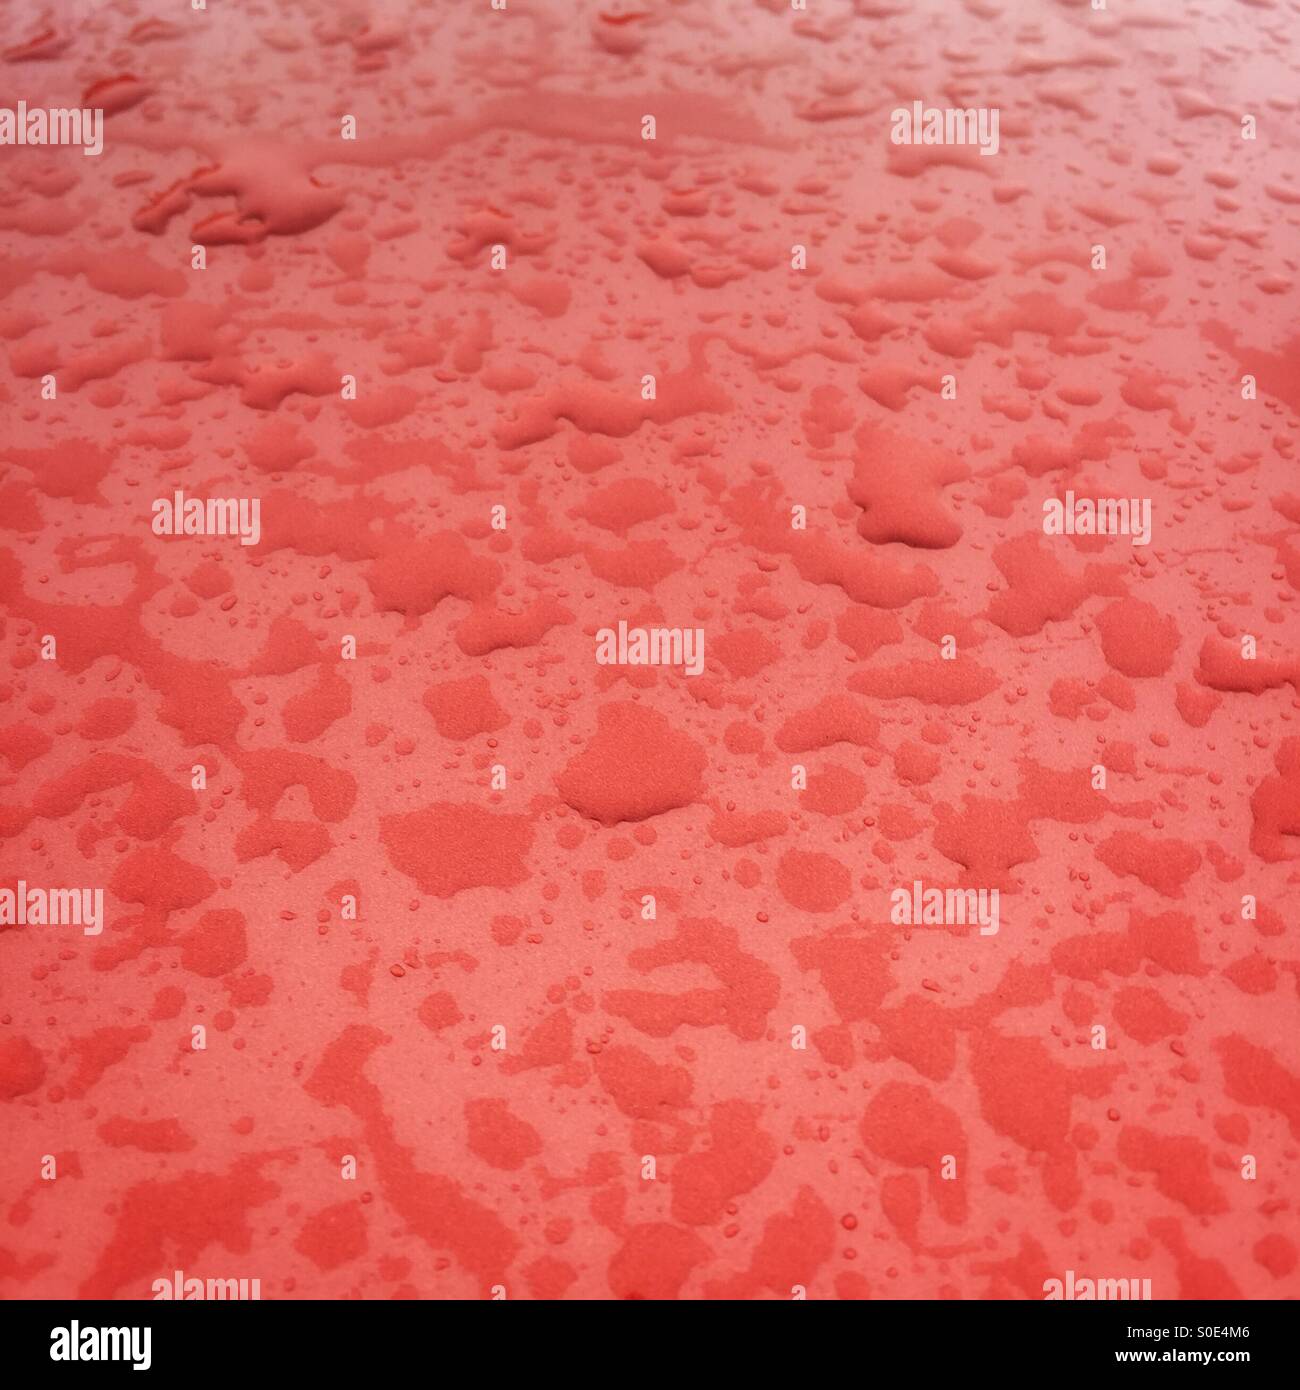 Water droplets on a metallic red background Stock Photo